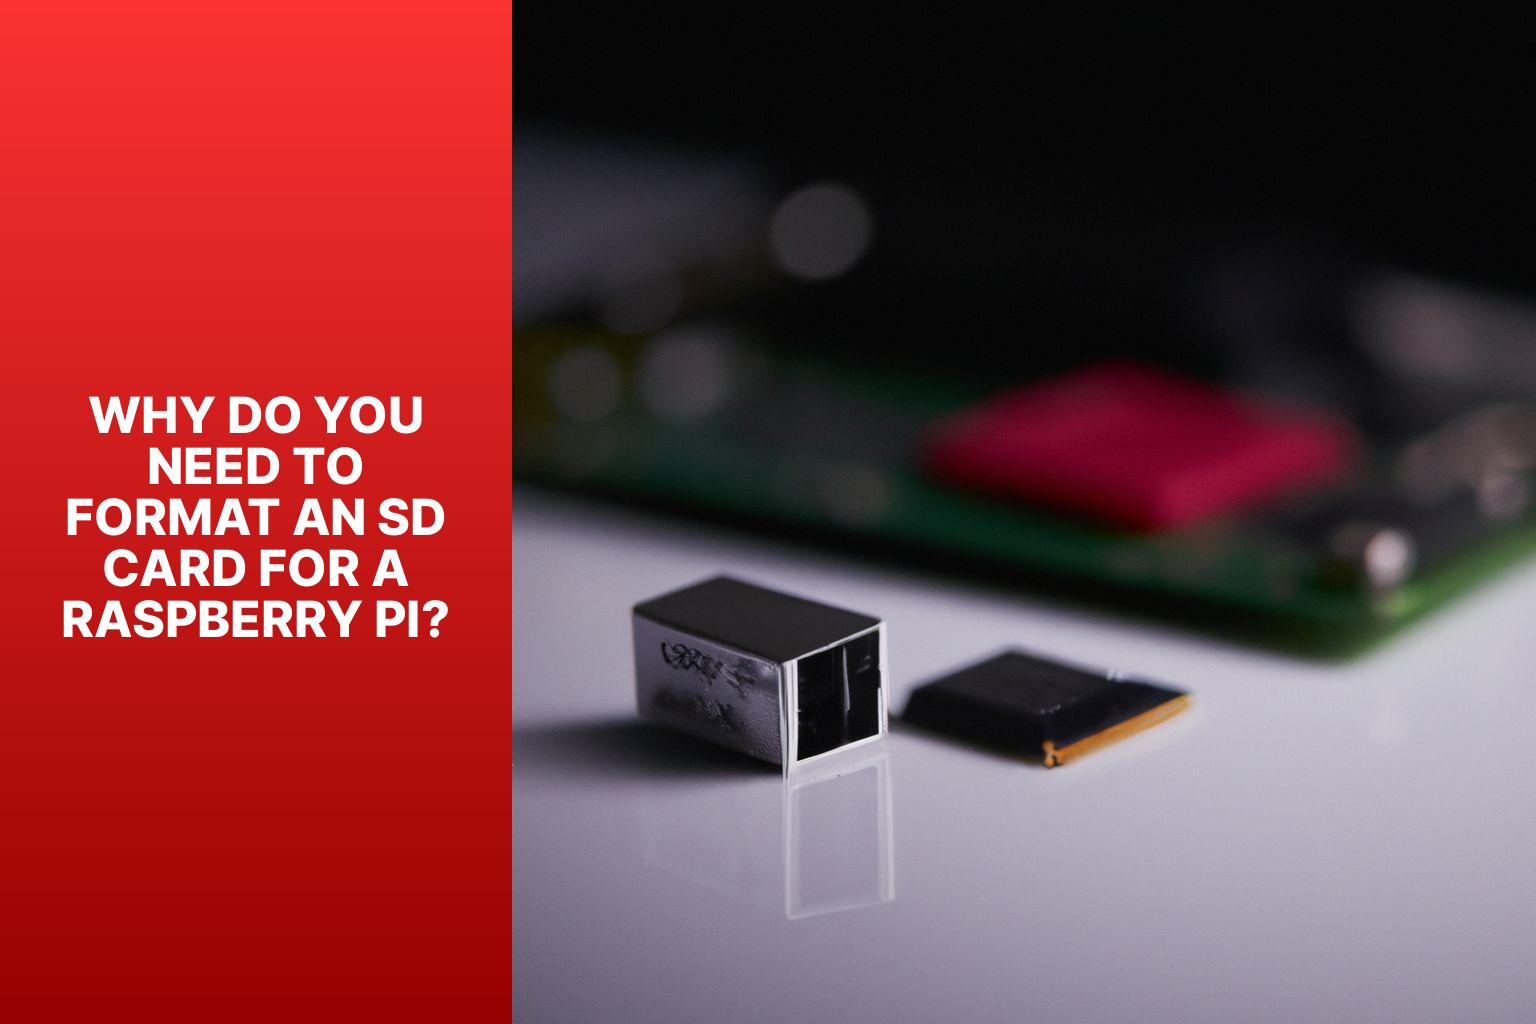 Why Do You Need to Format an SD Card for a Raspberry Pi? - how to format sd card for raspberry pi 